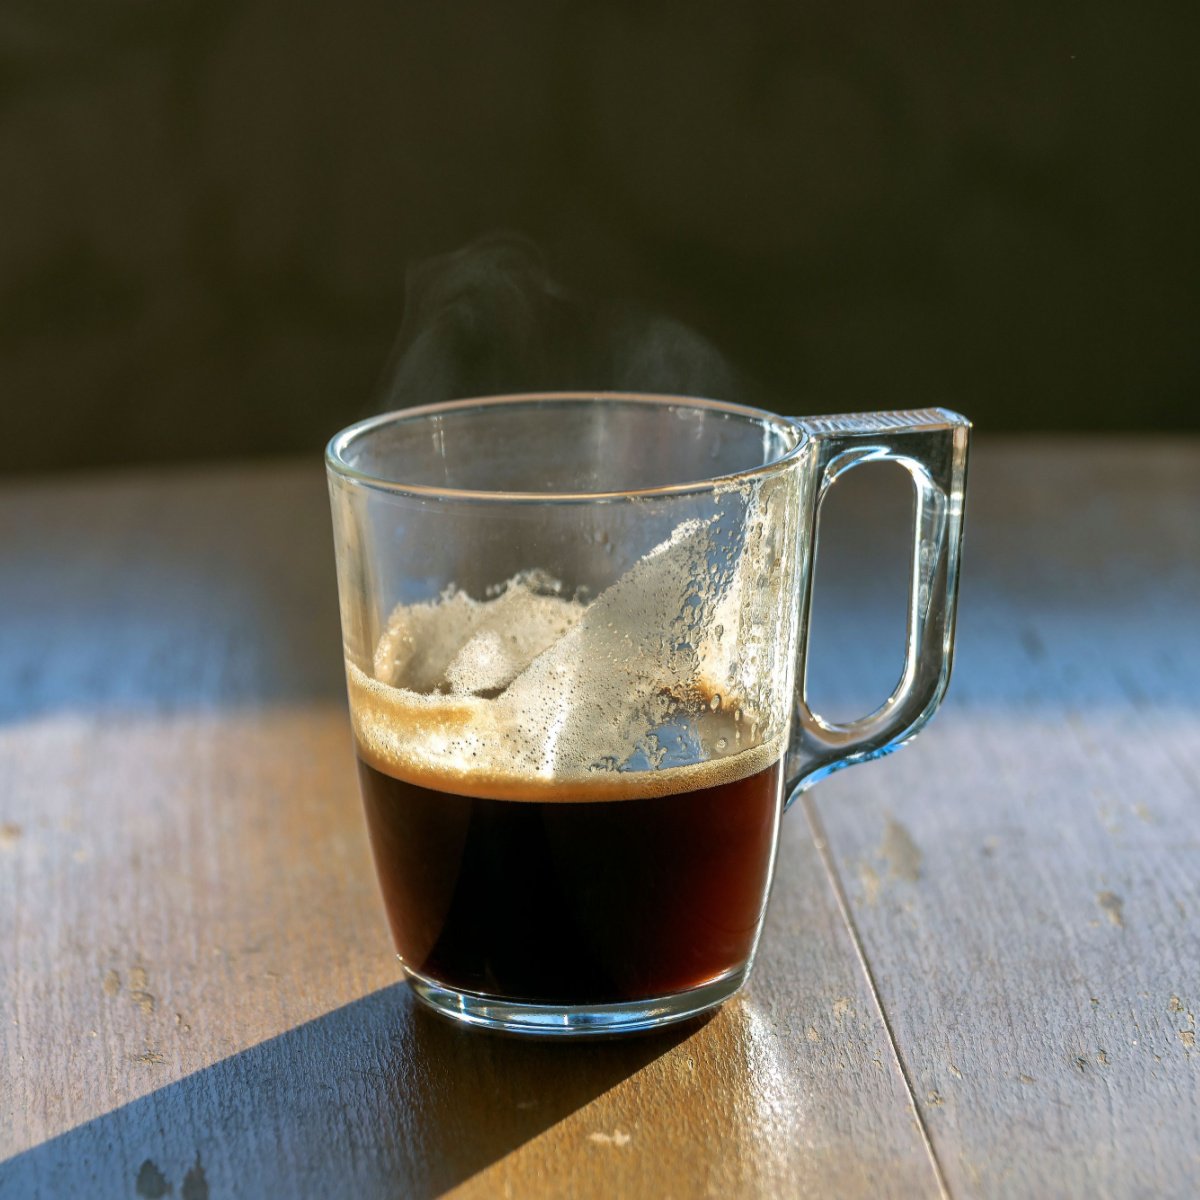 unfinished coffee in glass mug on wooden table